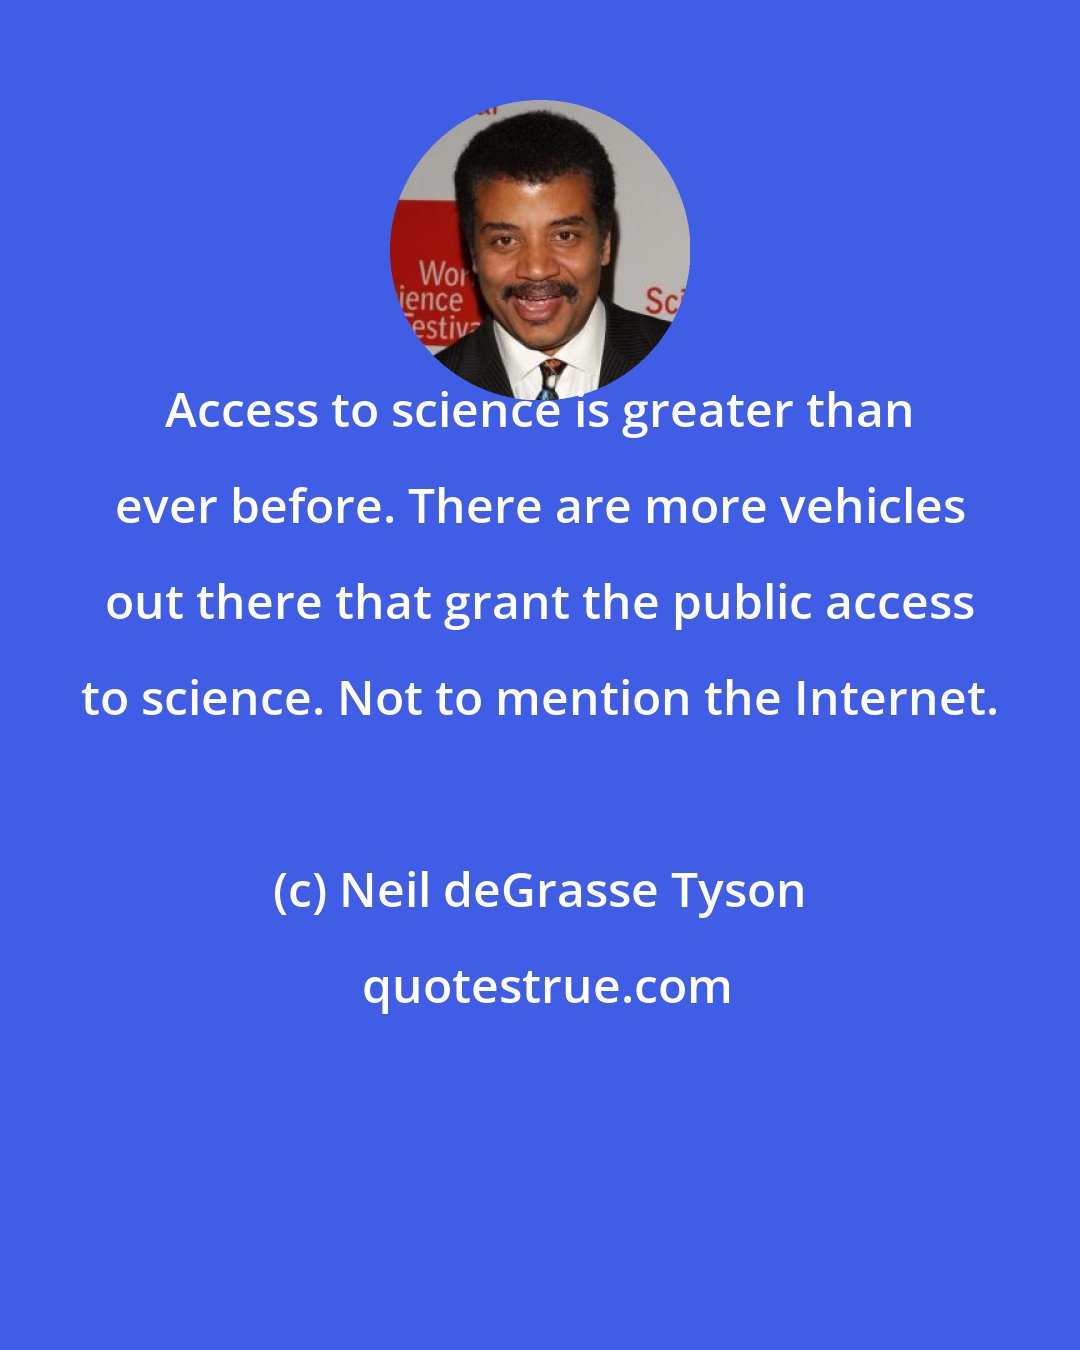 Neil deGrasse Tyson: Access to science is greater than ever before. There are more vehicles out there that grant the public access to science. Not to mention the Internet.